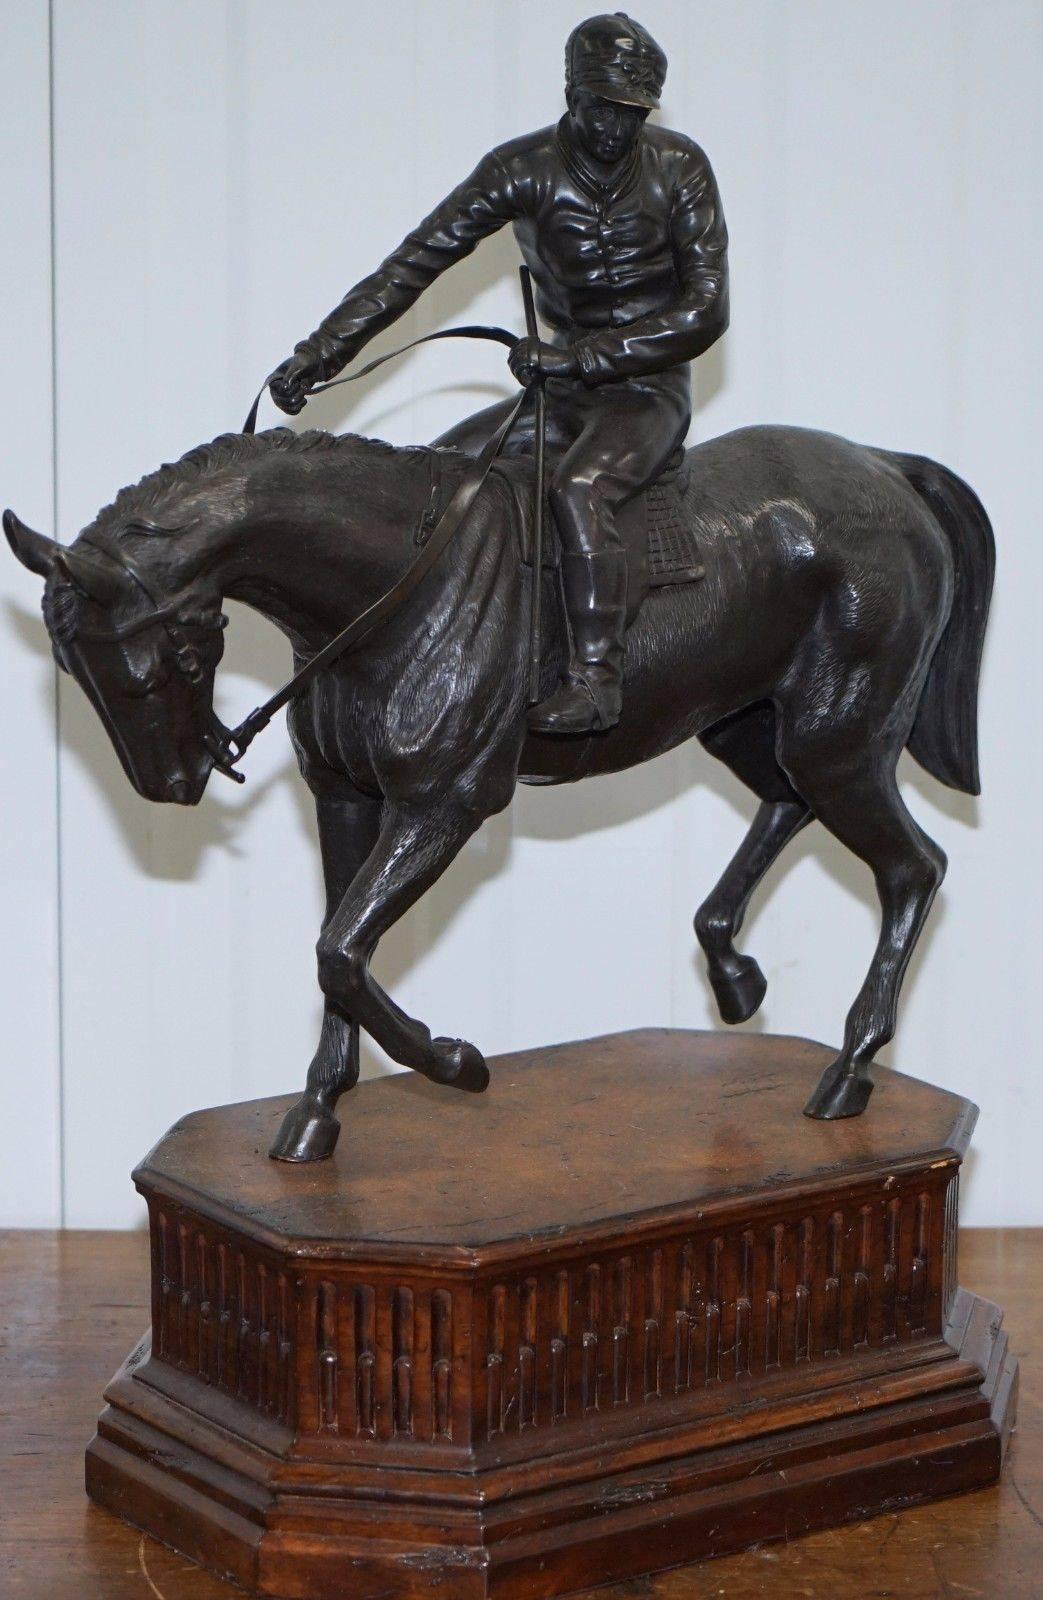 We are delighted to offer for sale this very large solid bronze Equestrian Horse & Jockey on a walnut painted base

A very good looking substantial and exceptionally heavy piece, the base seems to be walnut or simulated walnut, it sets the statue